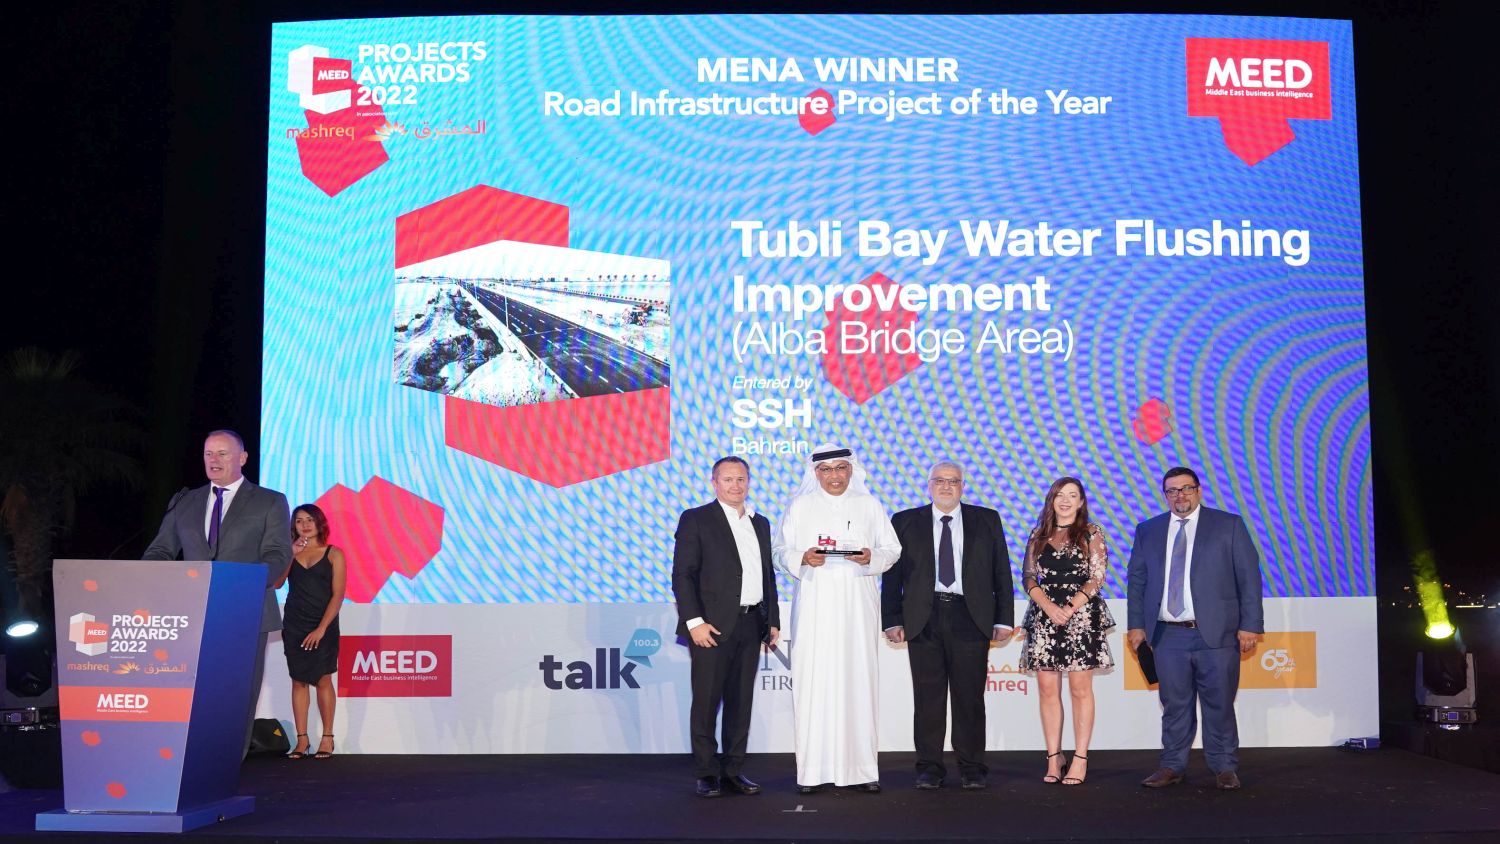 SSH collected the MENA Road Infrastructure Project of the Year award at the 2022 MEED Project Awards (Image courtesy of SSH)